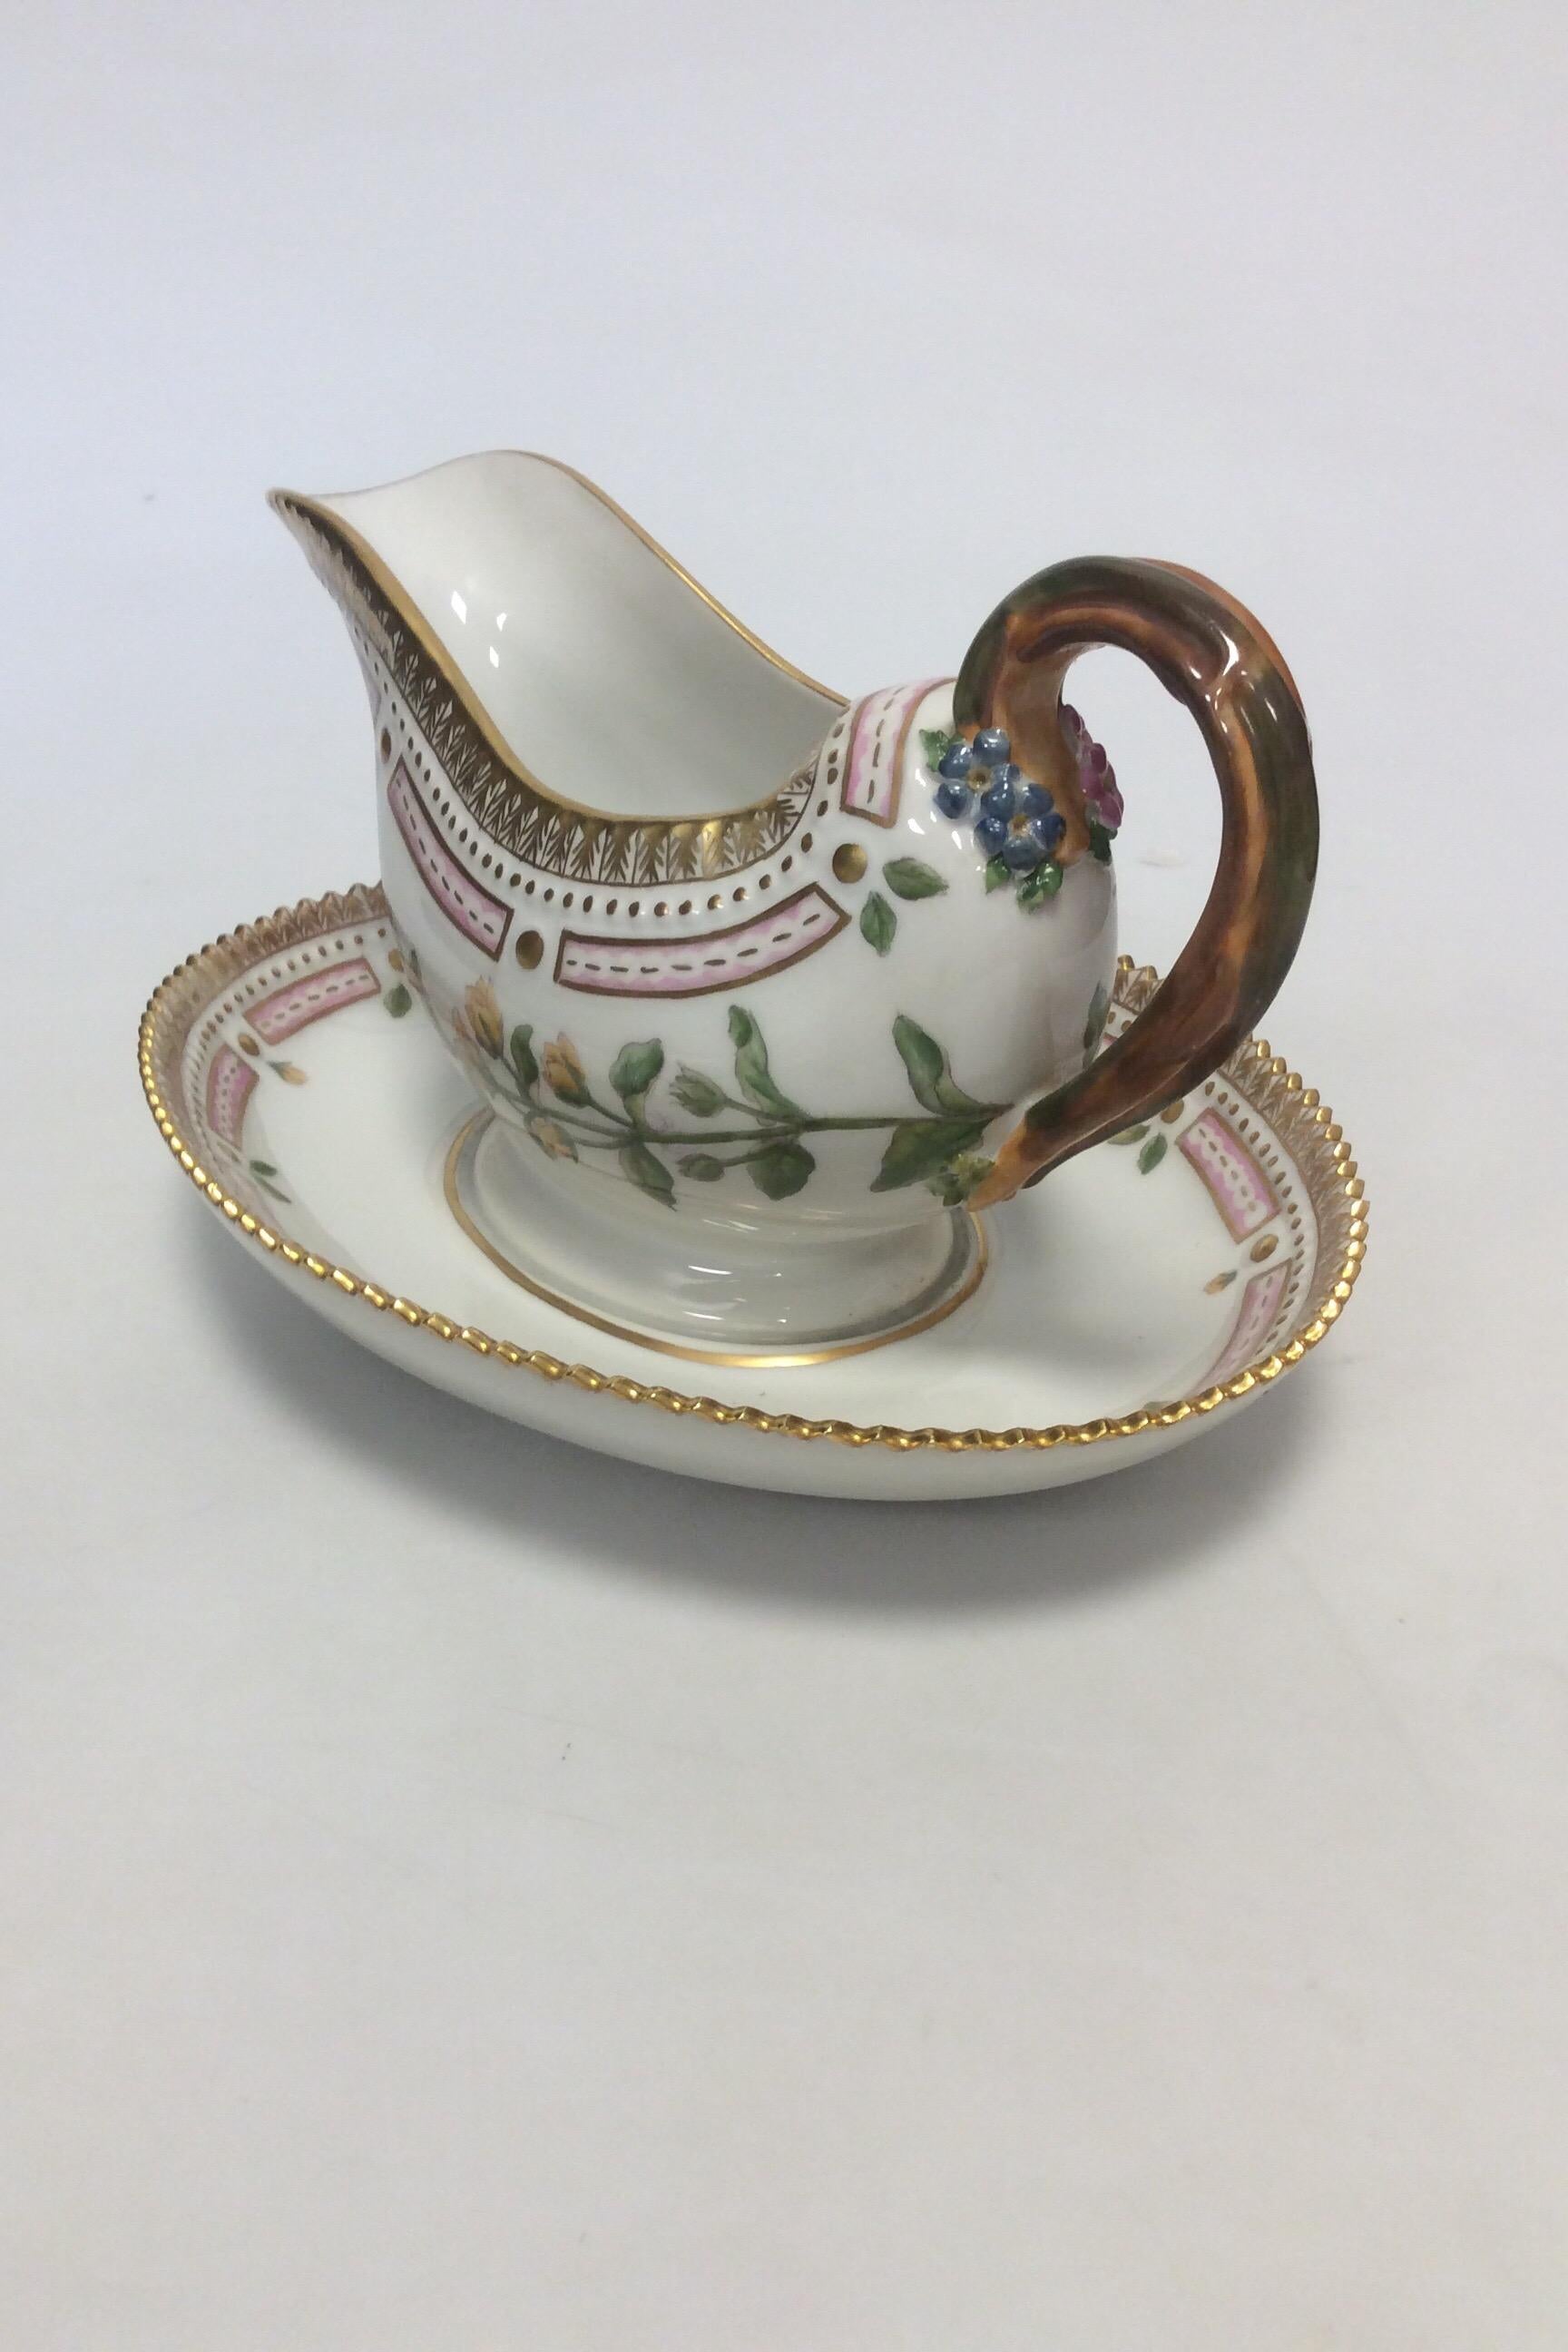 Empire Royal Copenhagen Flora Danica Sauce Boat with Attached Underplate No 20/3556 For Sale